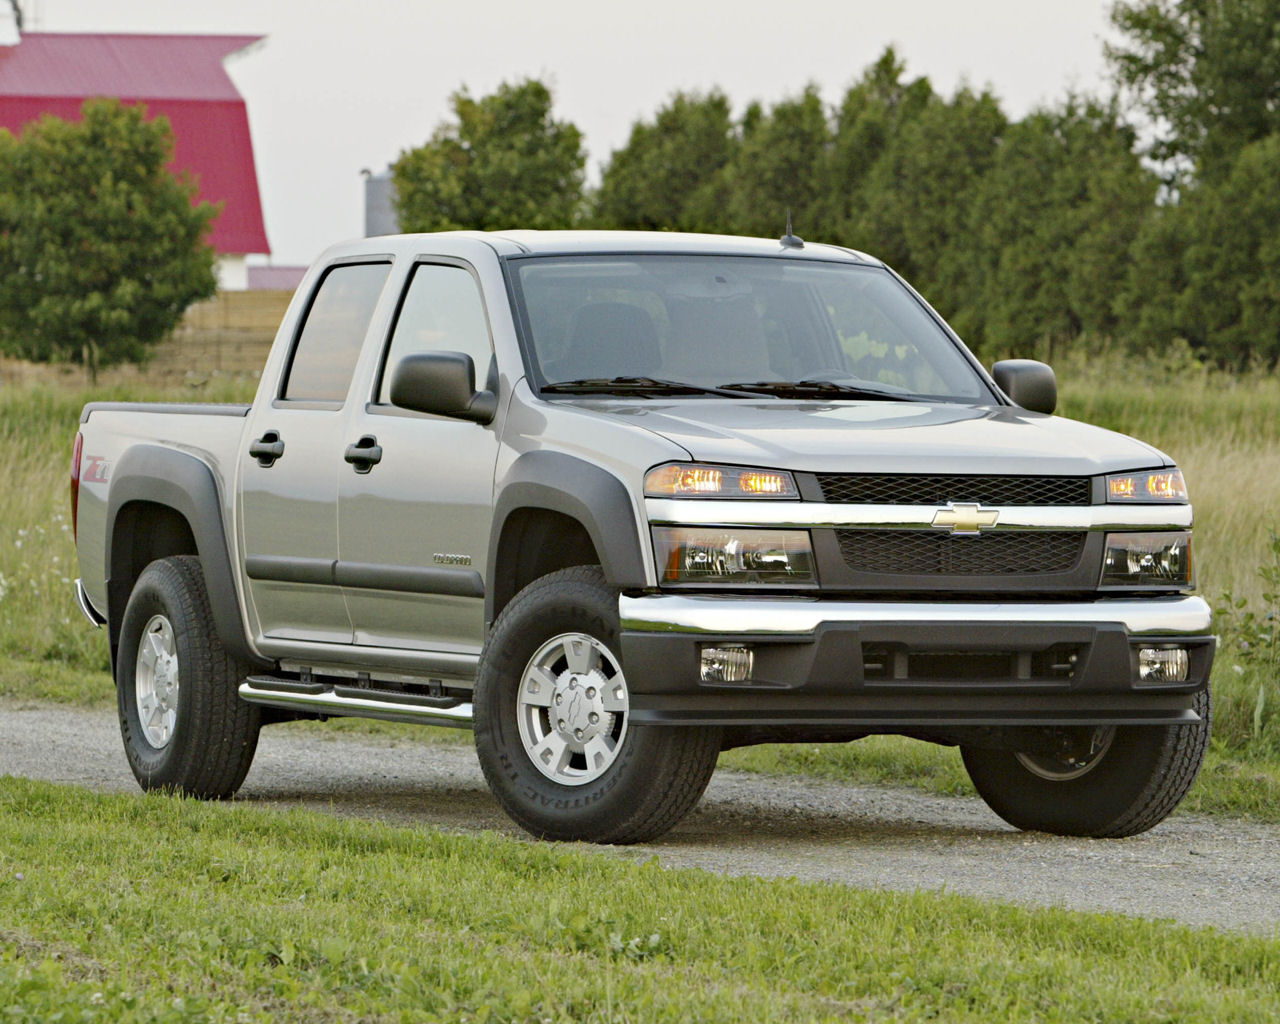 The Chevrolet Colorado Wallpaper Below And Choose Set As Background